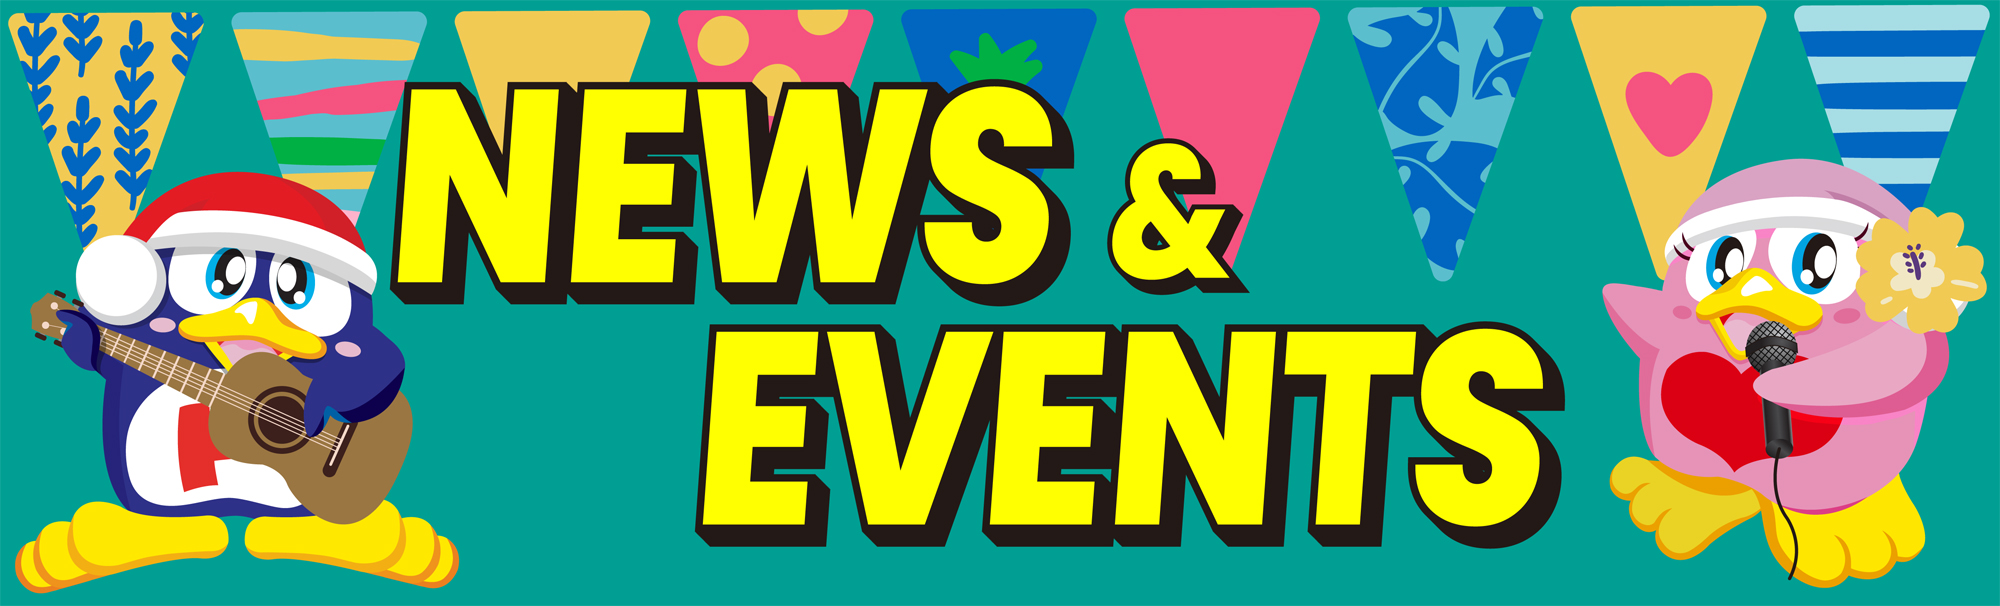 News & Events - Pearl City